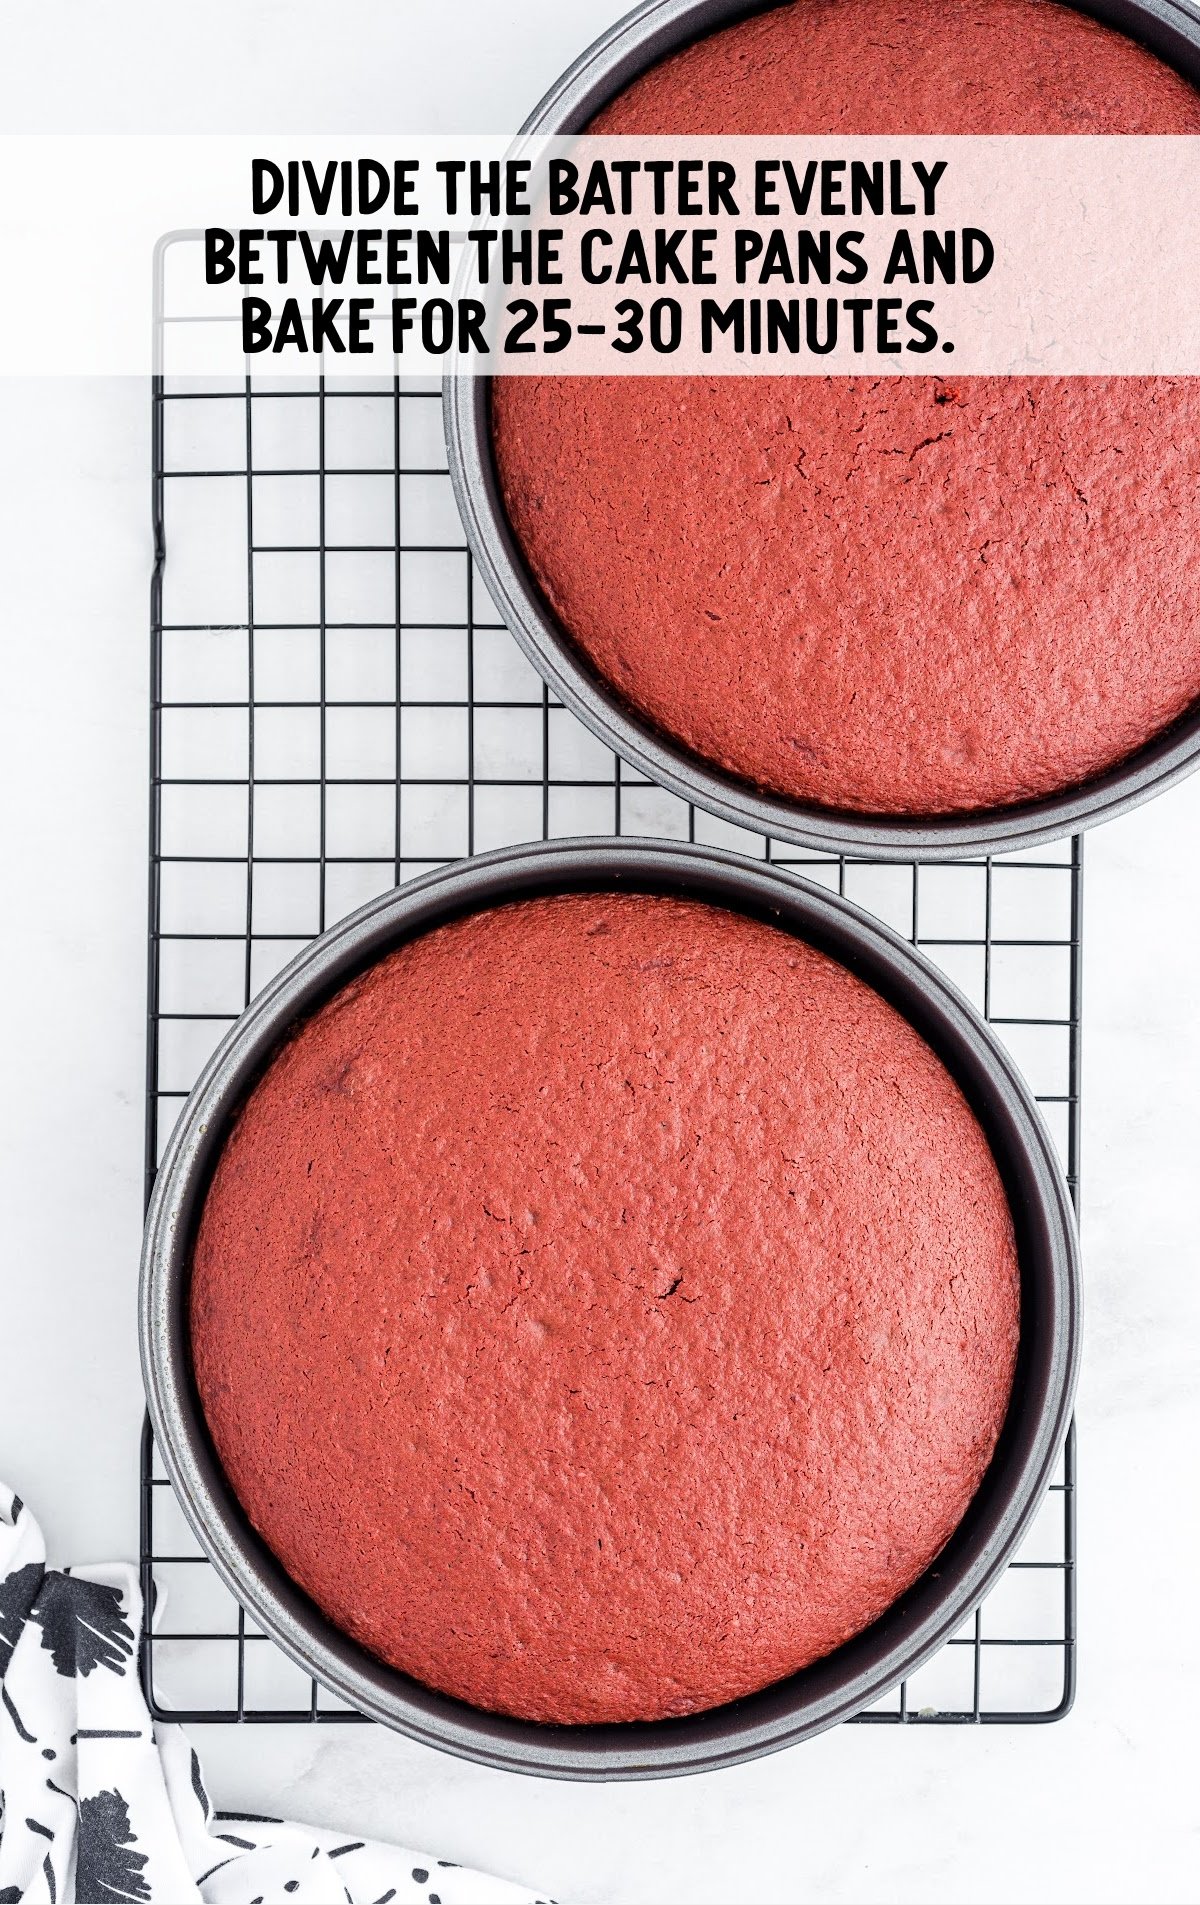 Red Velvet Cheesecake process shot of cake batter divided into two cake pans and then baked